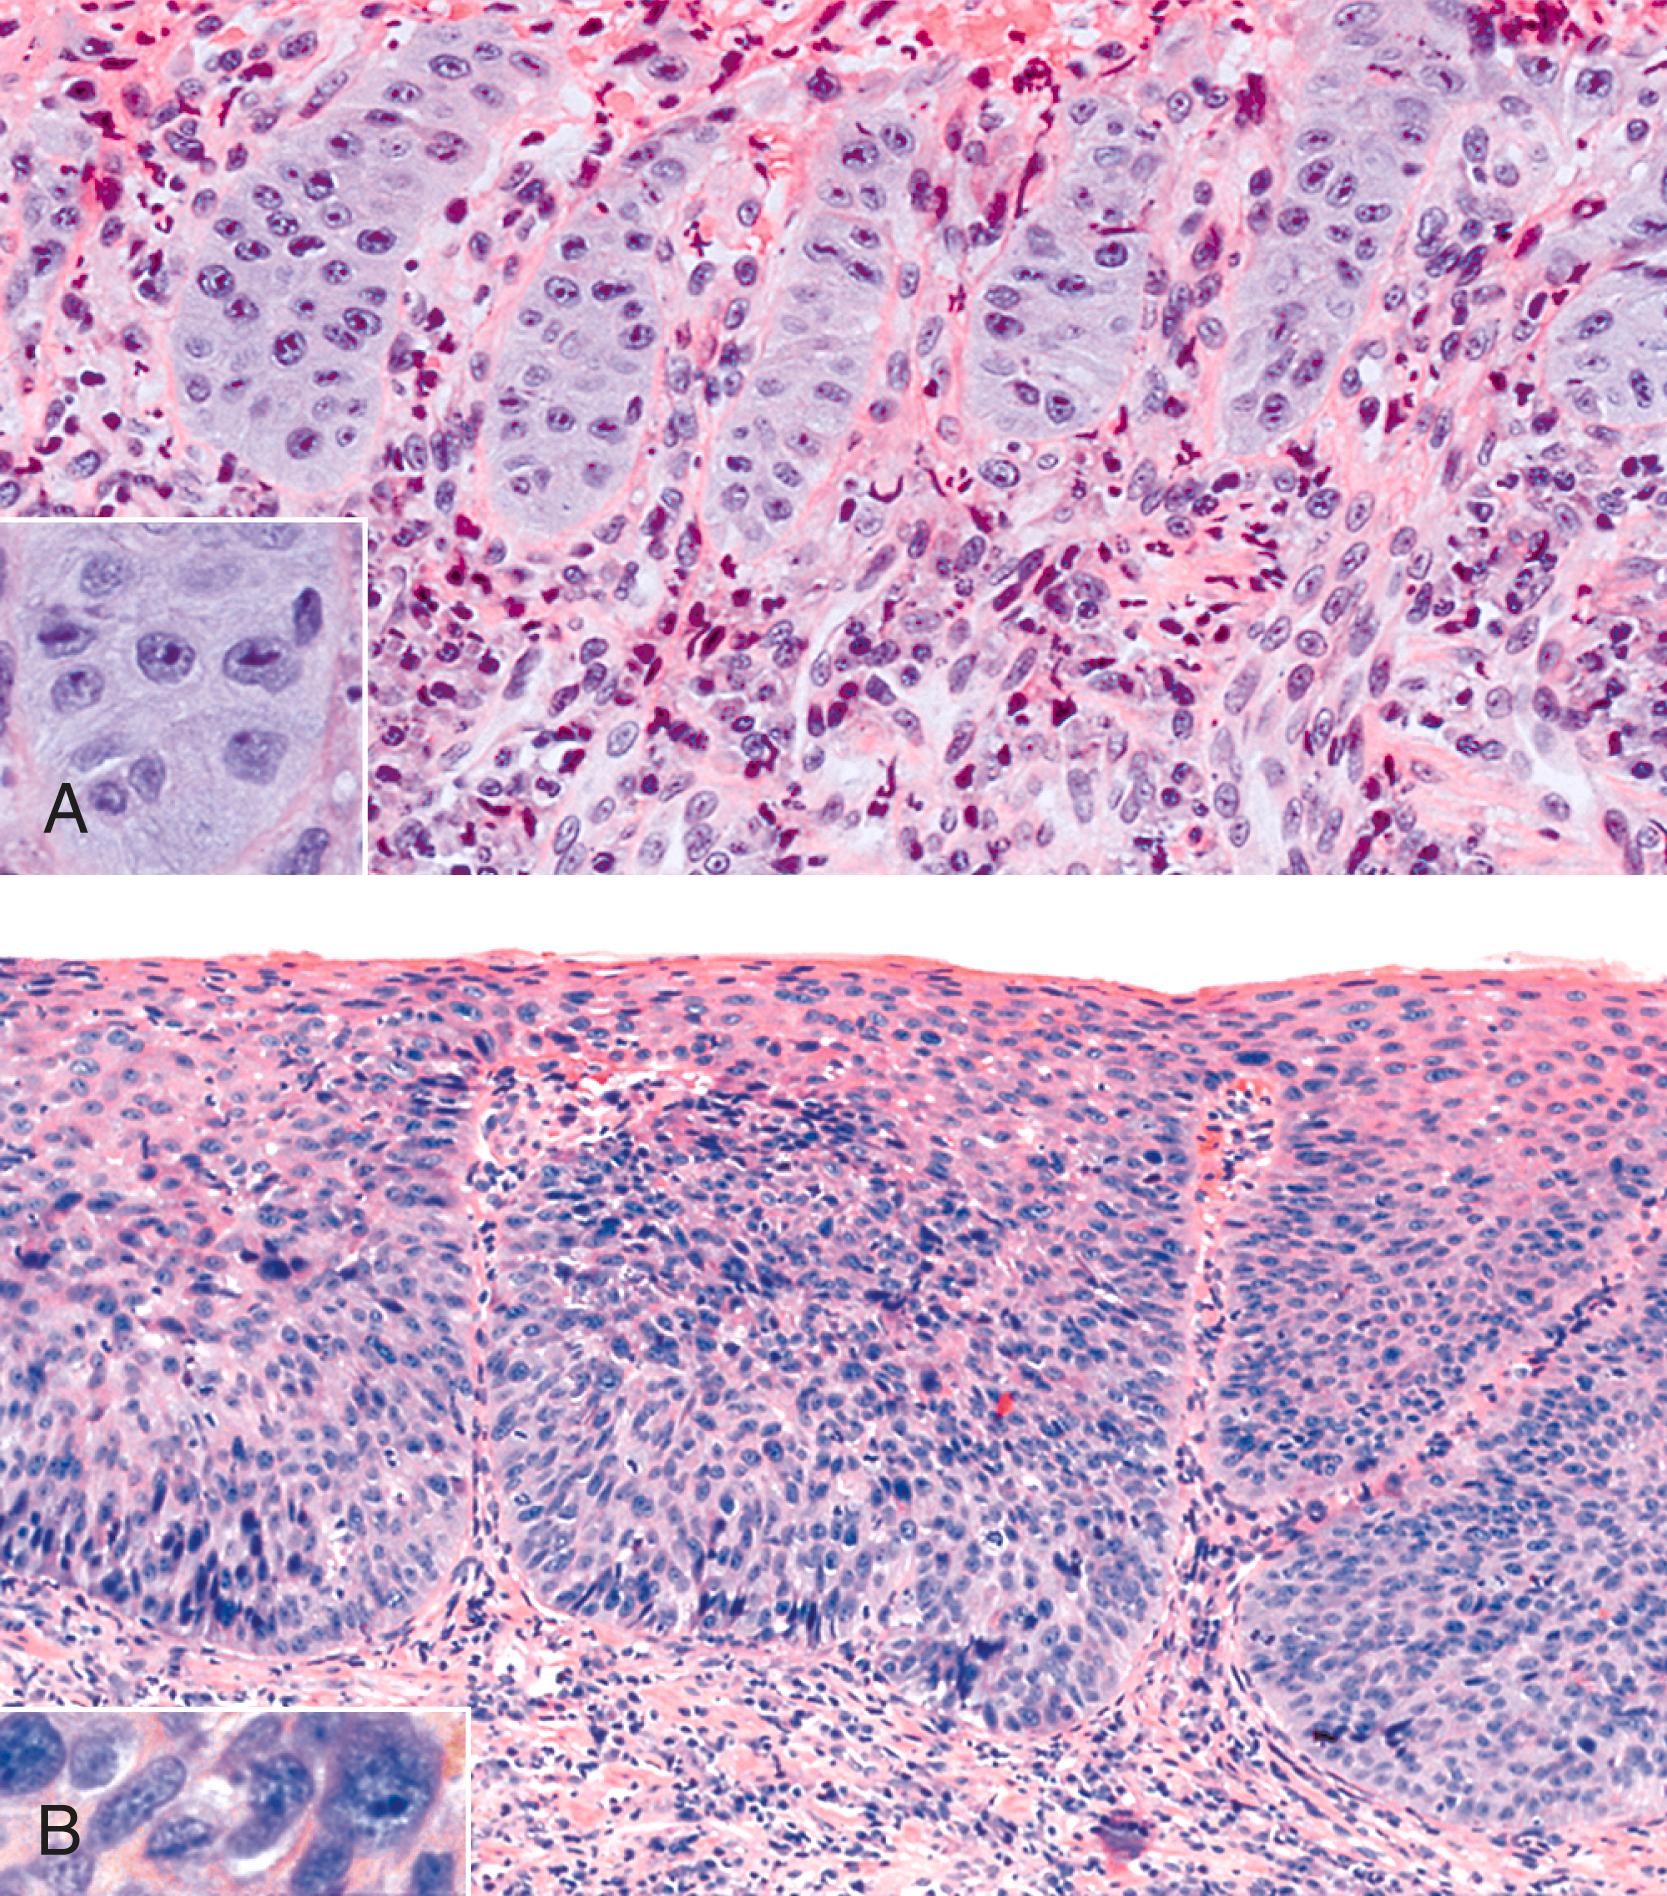 FIGURE 14.5, A, Marked reactive (pseudoepitheliomatous) hyperplasia in a patient with severe reflux esophagitis. Squamous cells are reactive and hyperchromatic and possess prominent nucleoli but do not show significant loss of polarity or nuclear overlap. The papillae are of uniform length and width, and the nuclei, although mildly atypical, are uniform in appearance (inset) . B, In high-grade squamous dysplasia, the papillae vary in size and shape, and there is considerable nuclear pleomorphism, hyperchromasia, and nuclear overlapping (inset) .